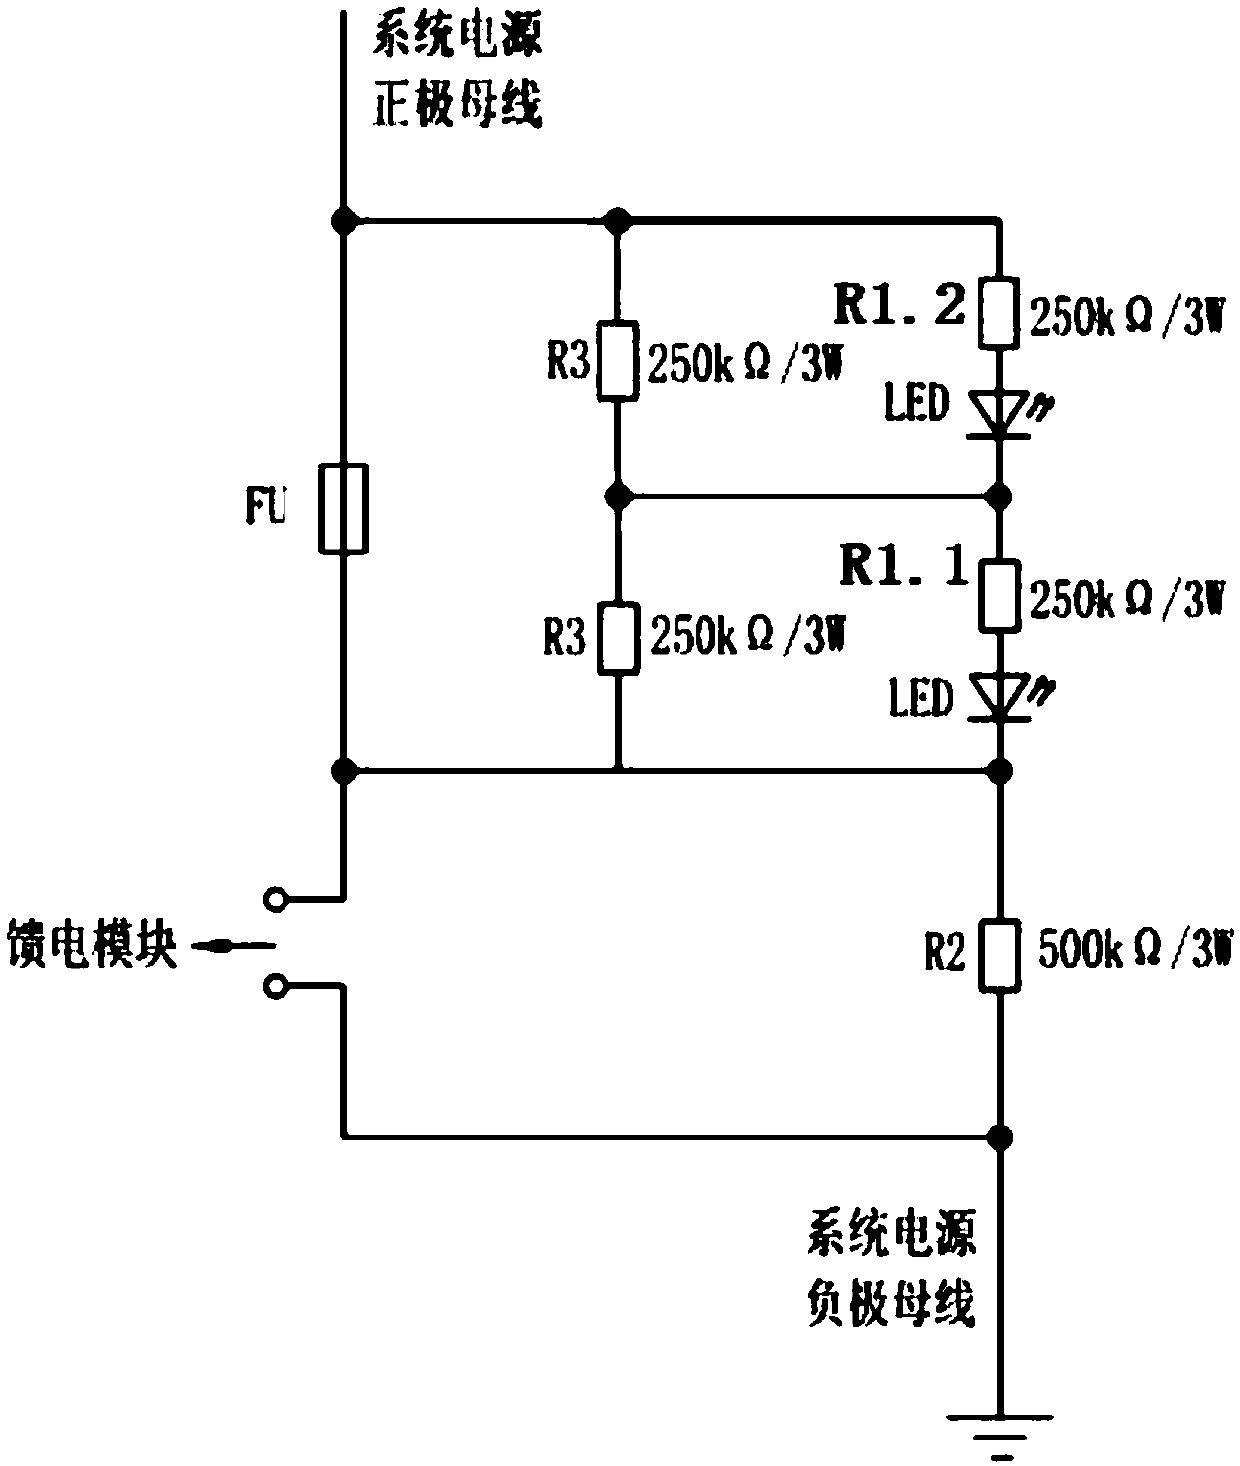 Feed short-circuit protector of sectionally continuous ground power supply system of electrical vehicle